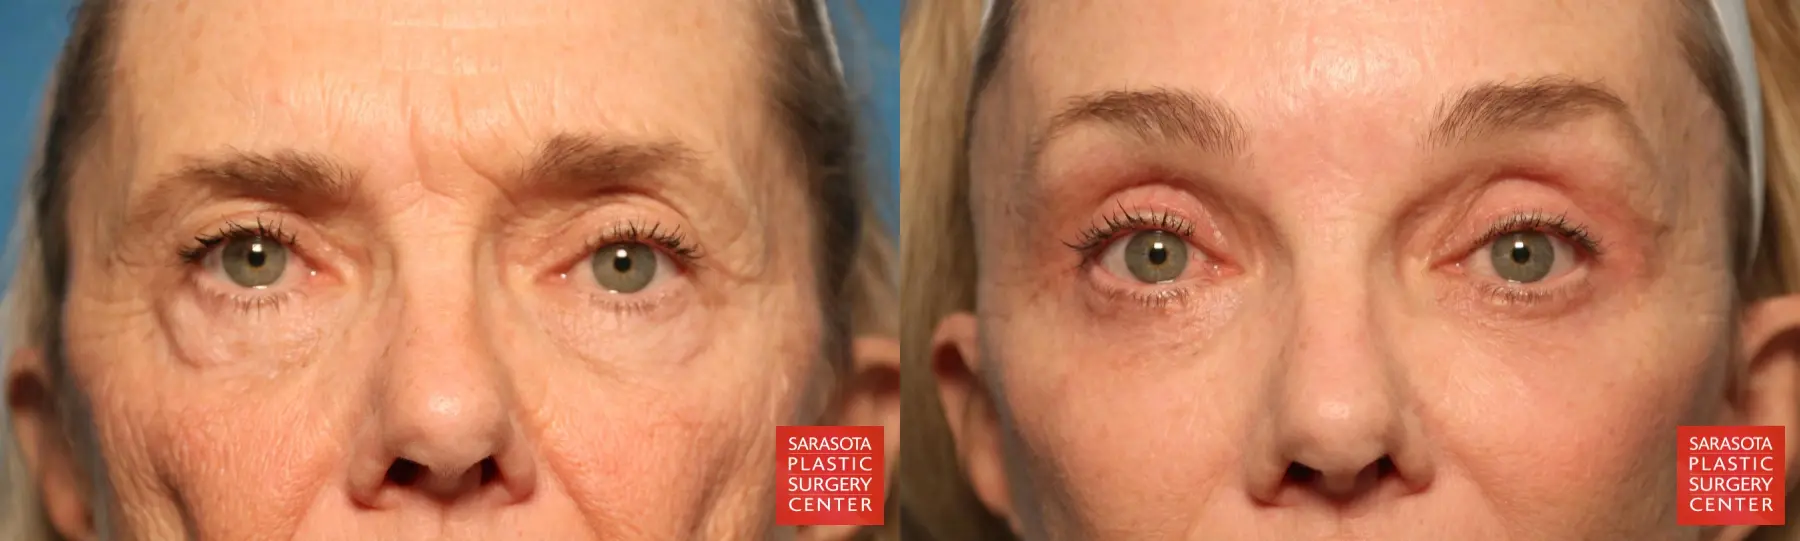 Eyelid Surgery: Patient 17 - Before and After  